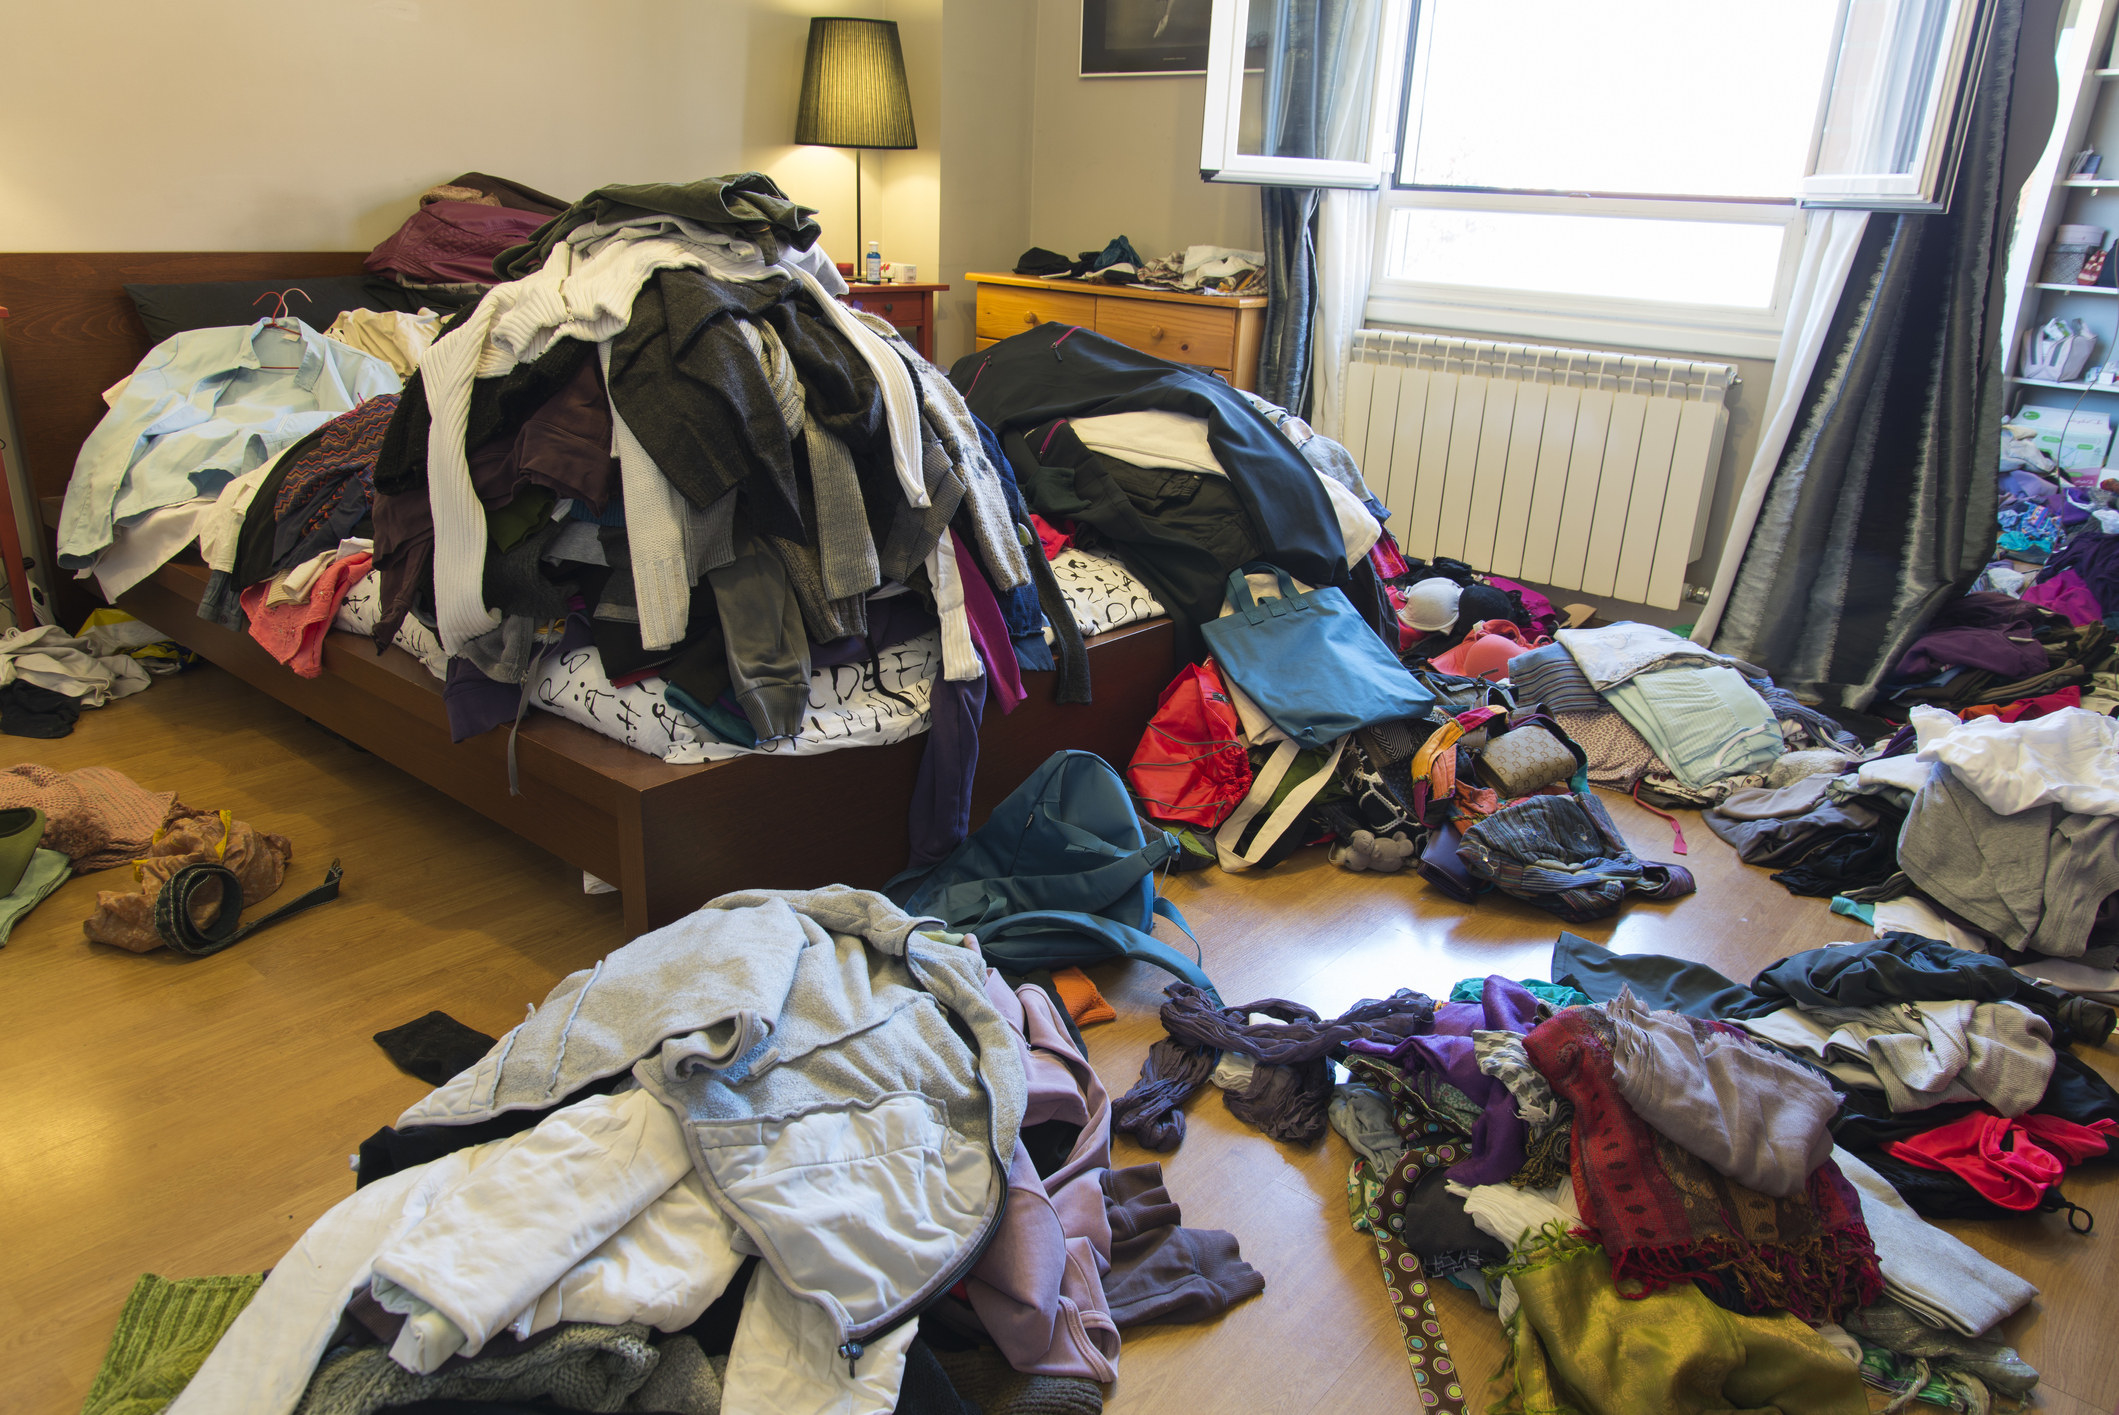 Wide angle view of large bedroom with piles of clothes on the floor and messy bed